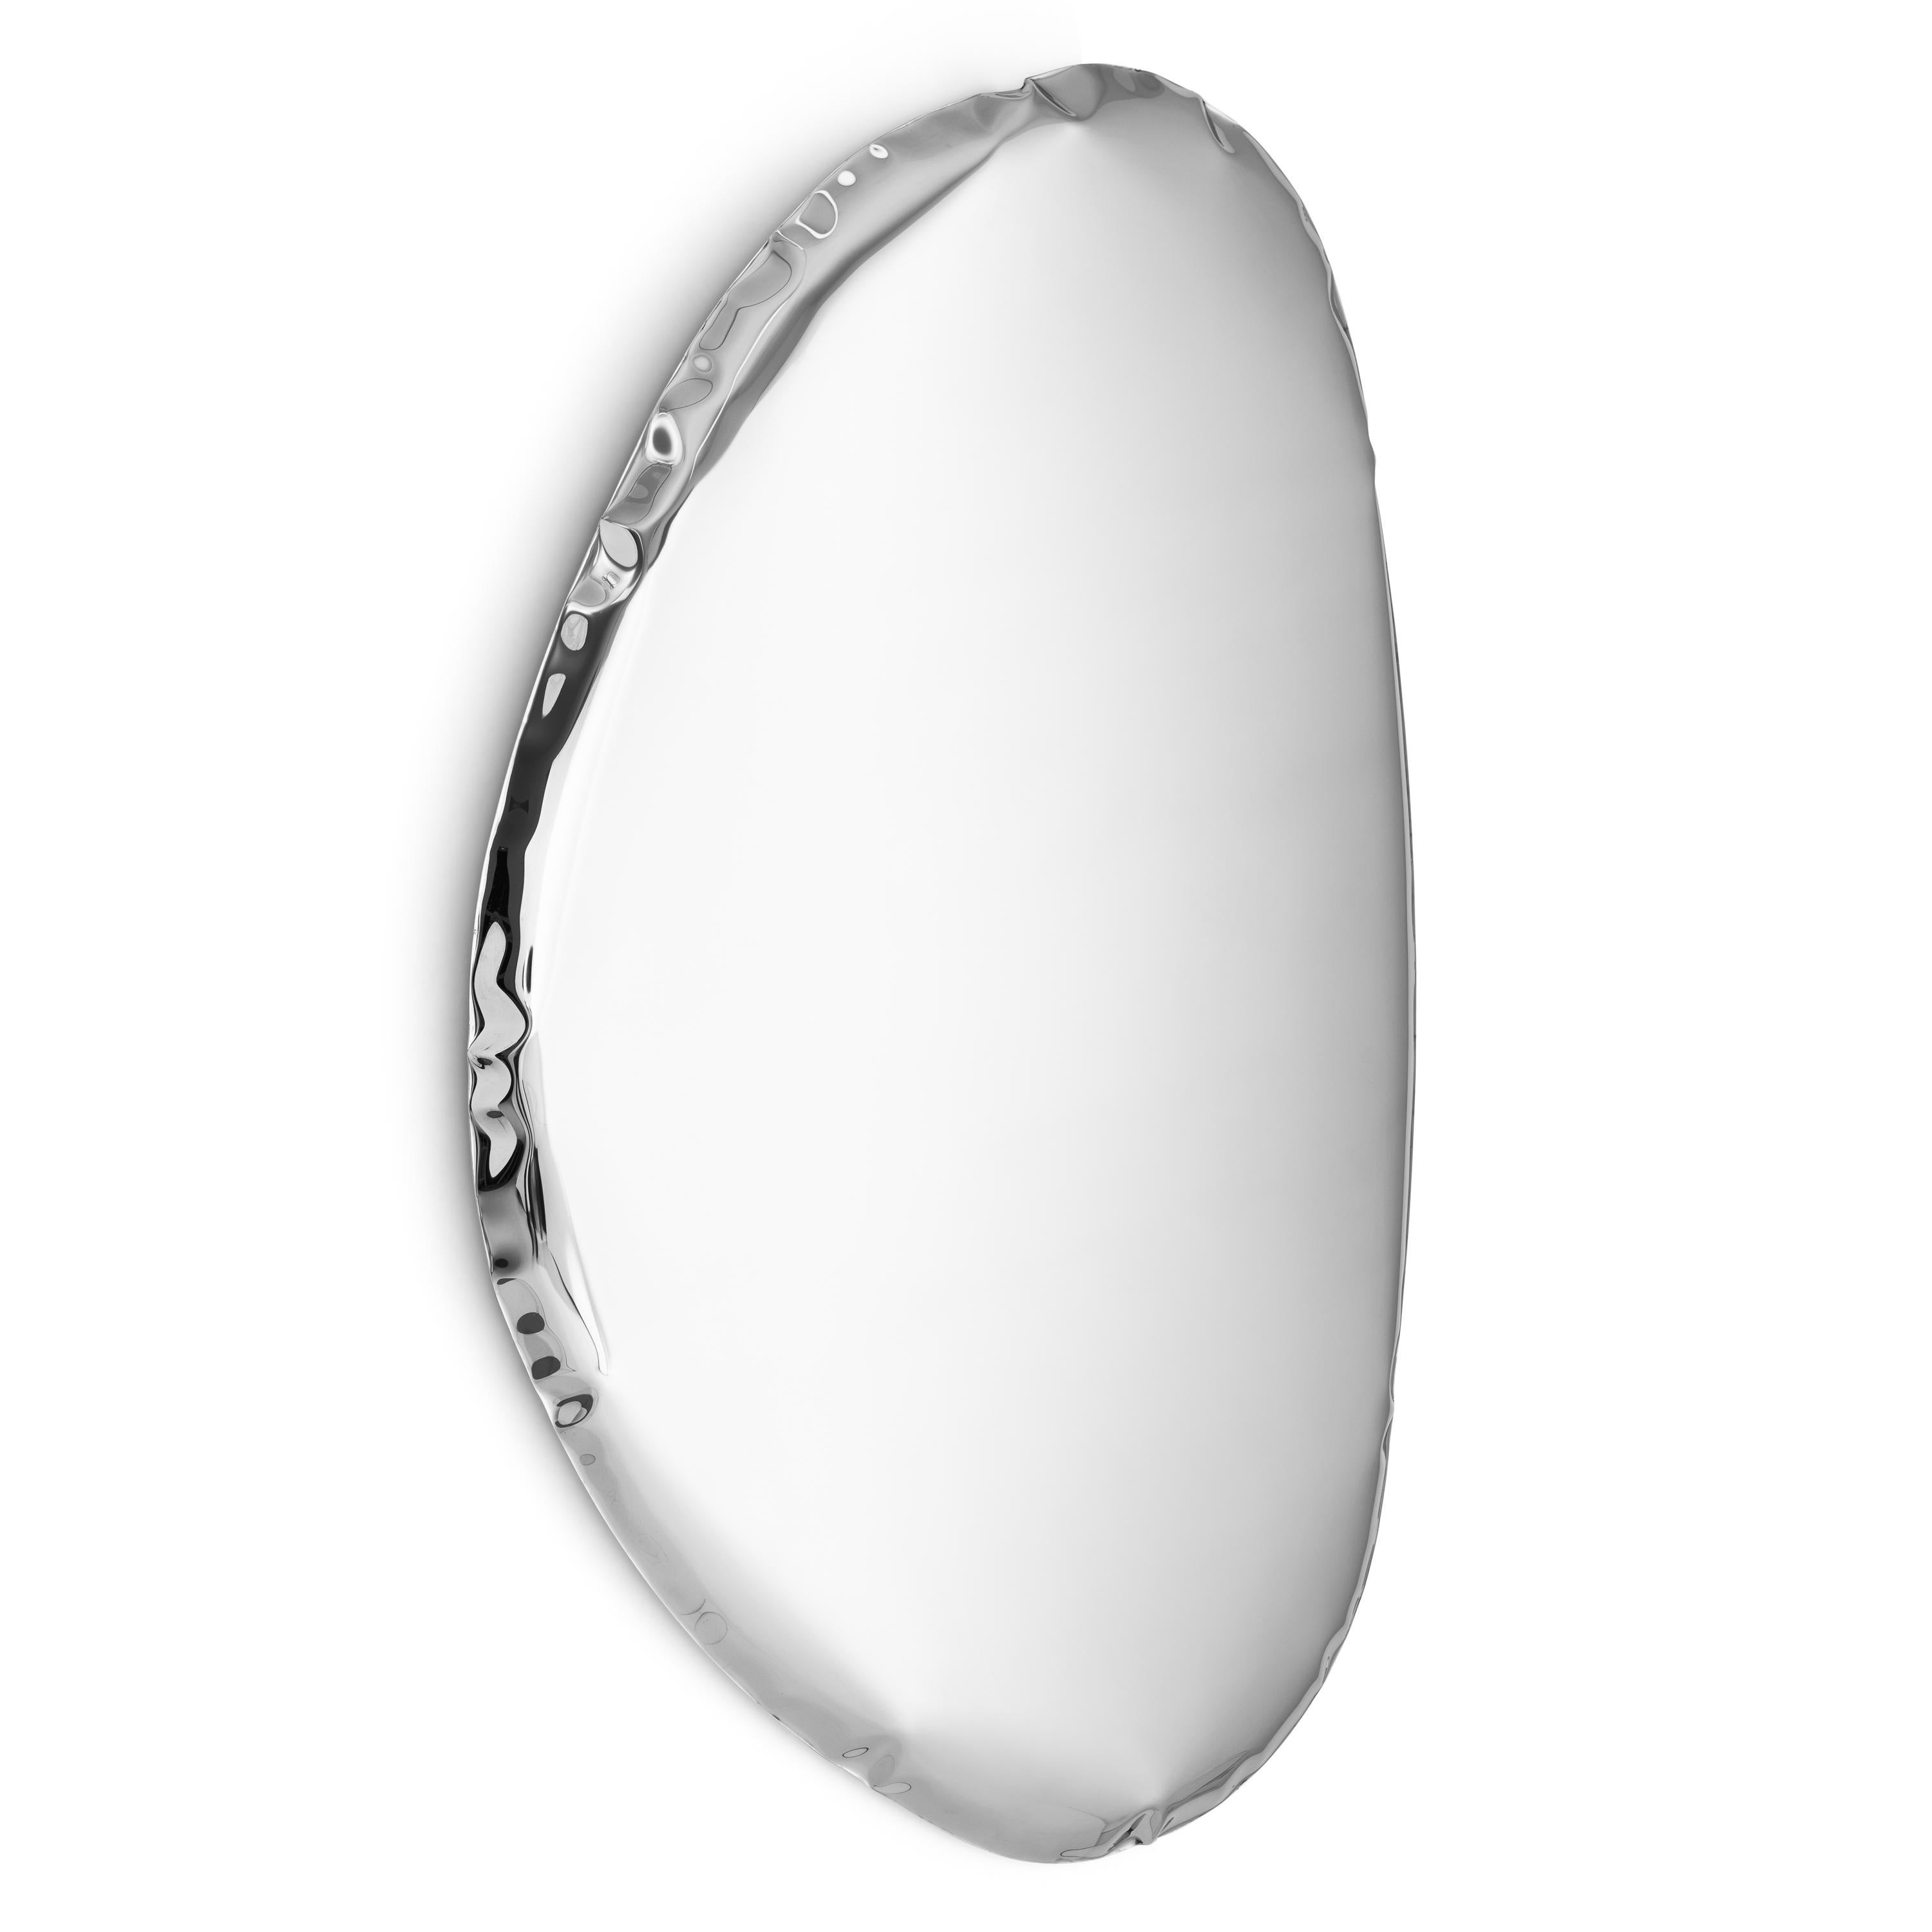 Mirror Tafla O3 in Polished Stainless Steel by Zieta For Sale